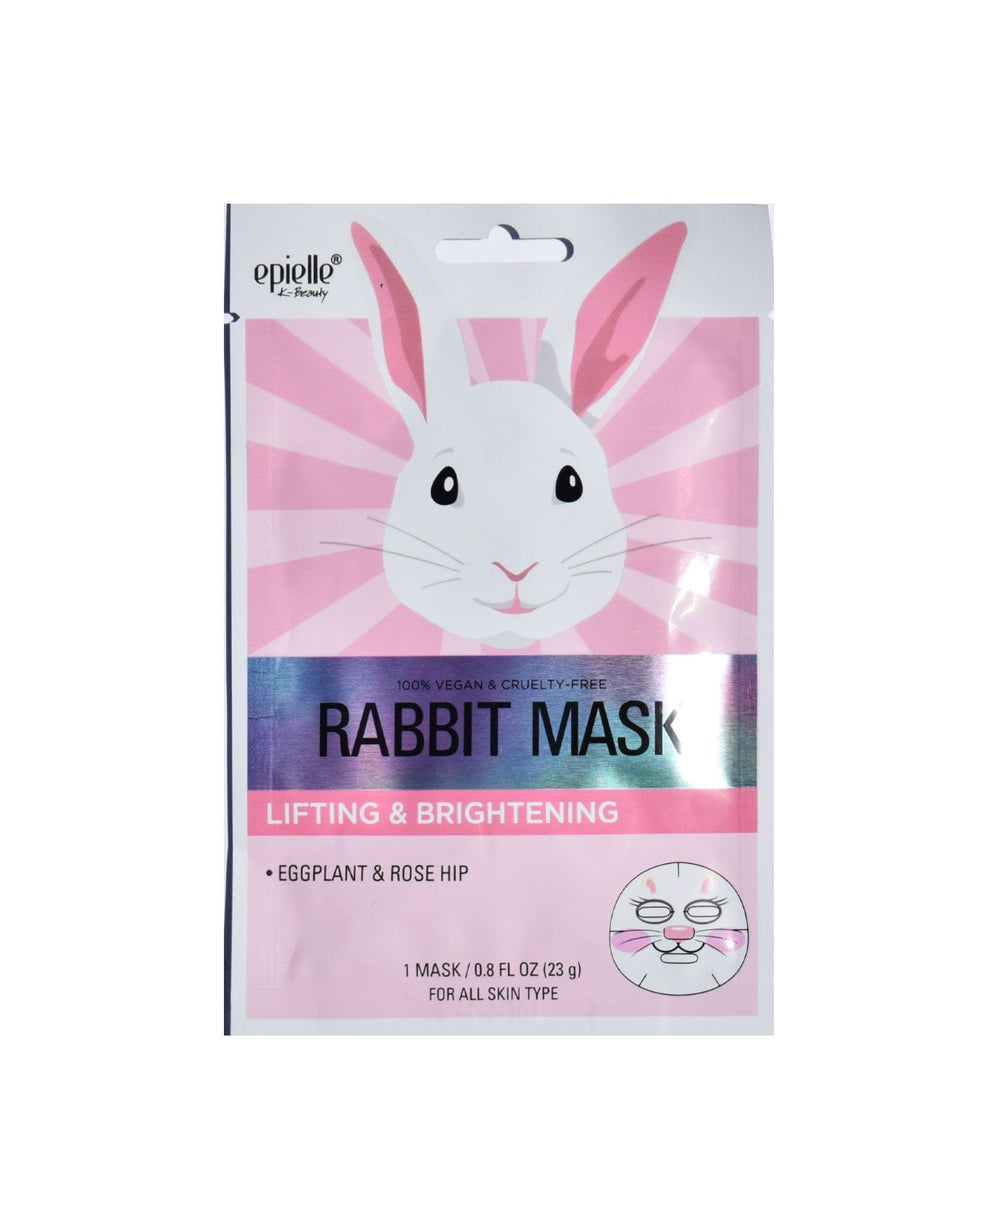 character skin care mask